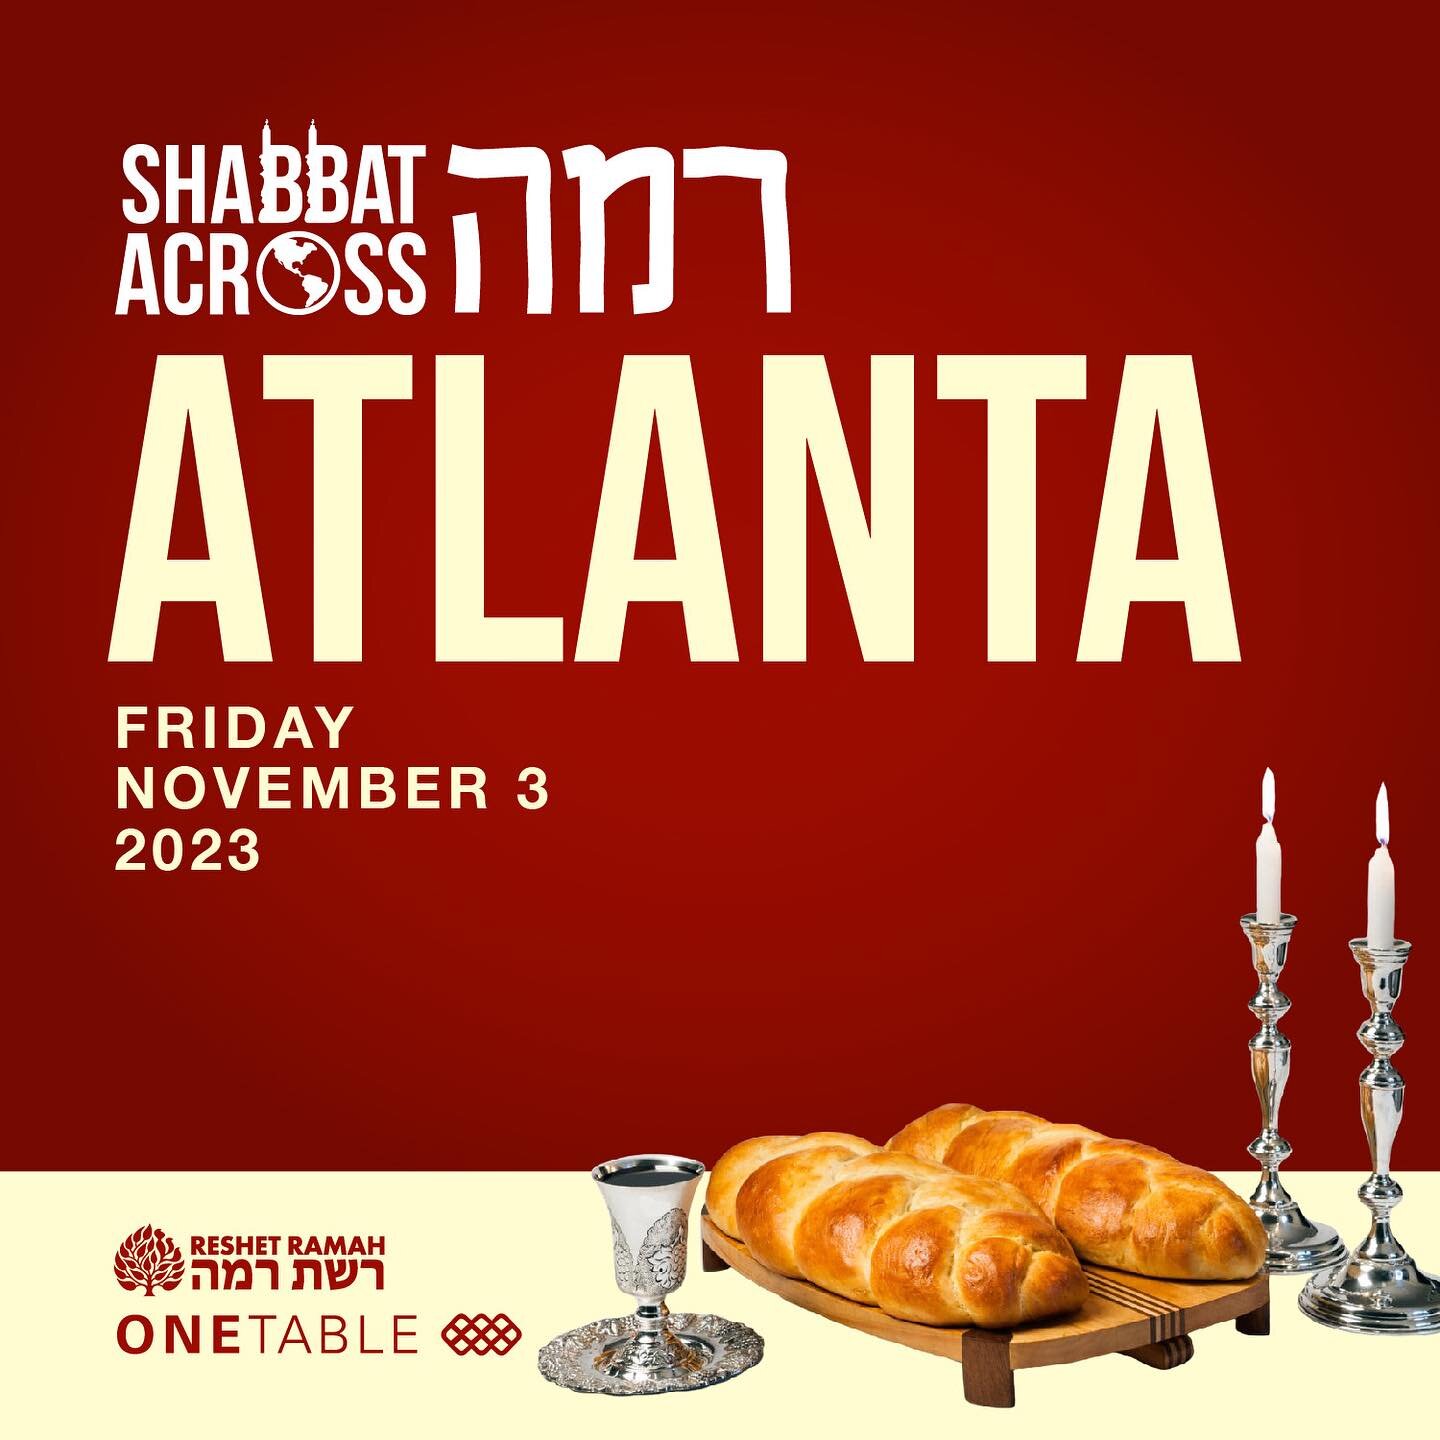 How are you celebrating Shabbat Across Ramah on Friday, November 3? Join hundreds of Ramahniks across the world in gathering for Shabbat next week.

Young professionals (22-39ish) are invited to swipe through to find a meal near you, then head to the